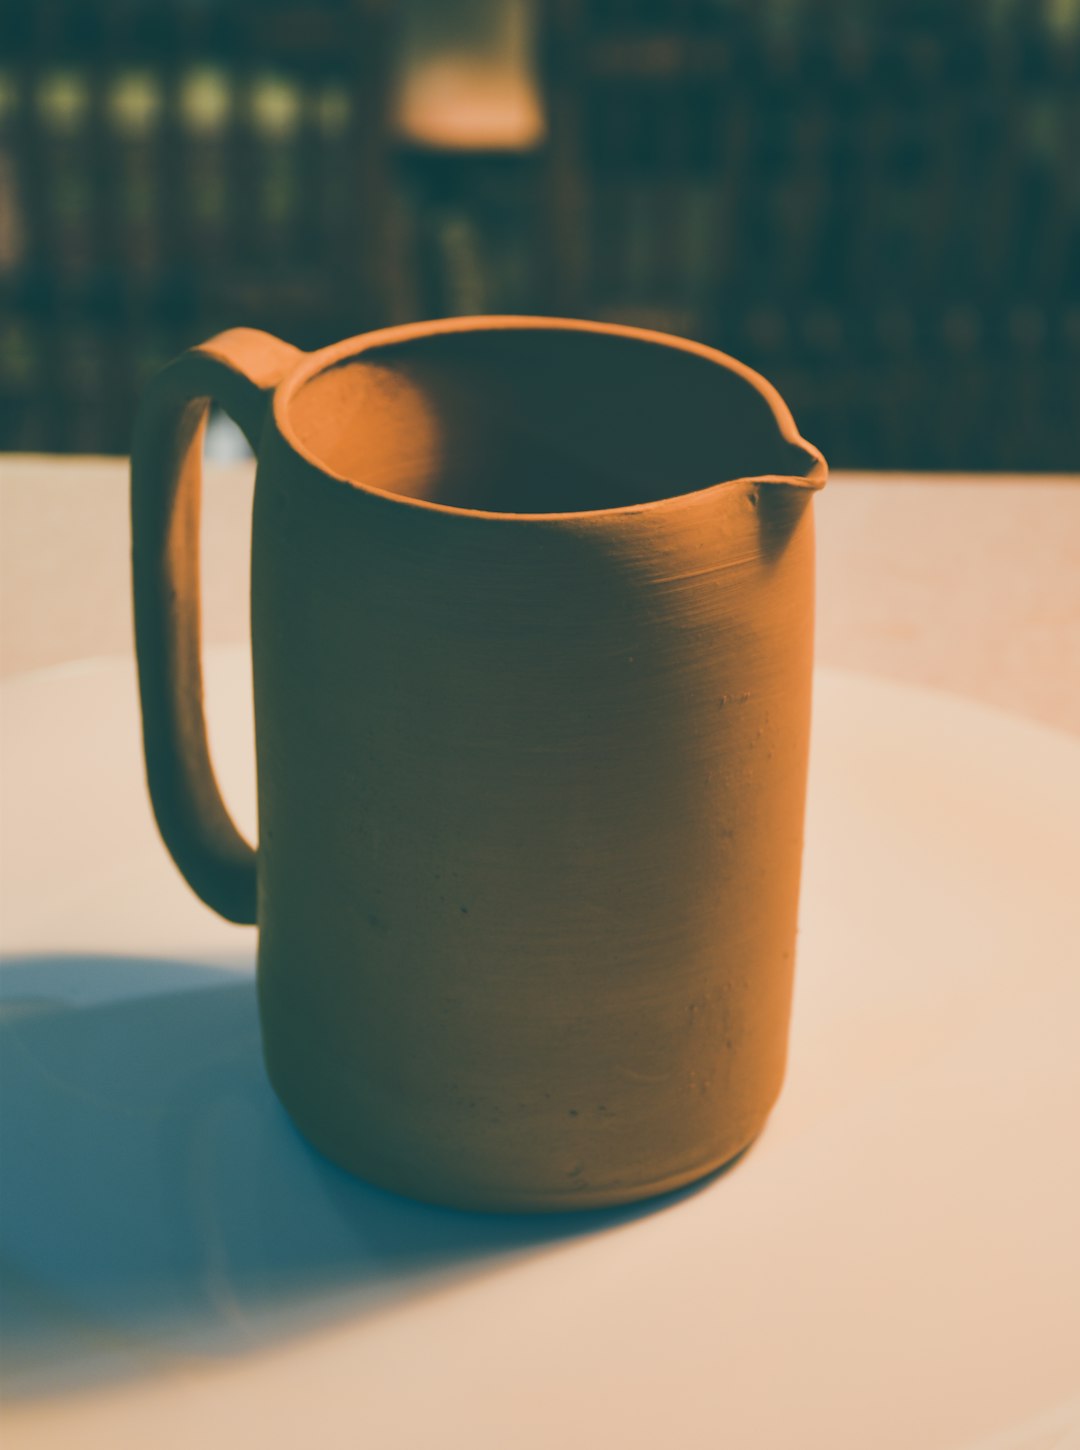 brown ceramic pitcher on blue table